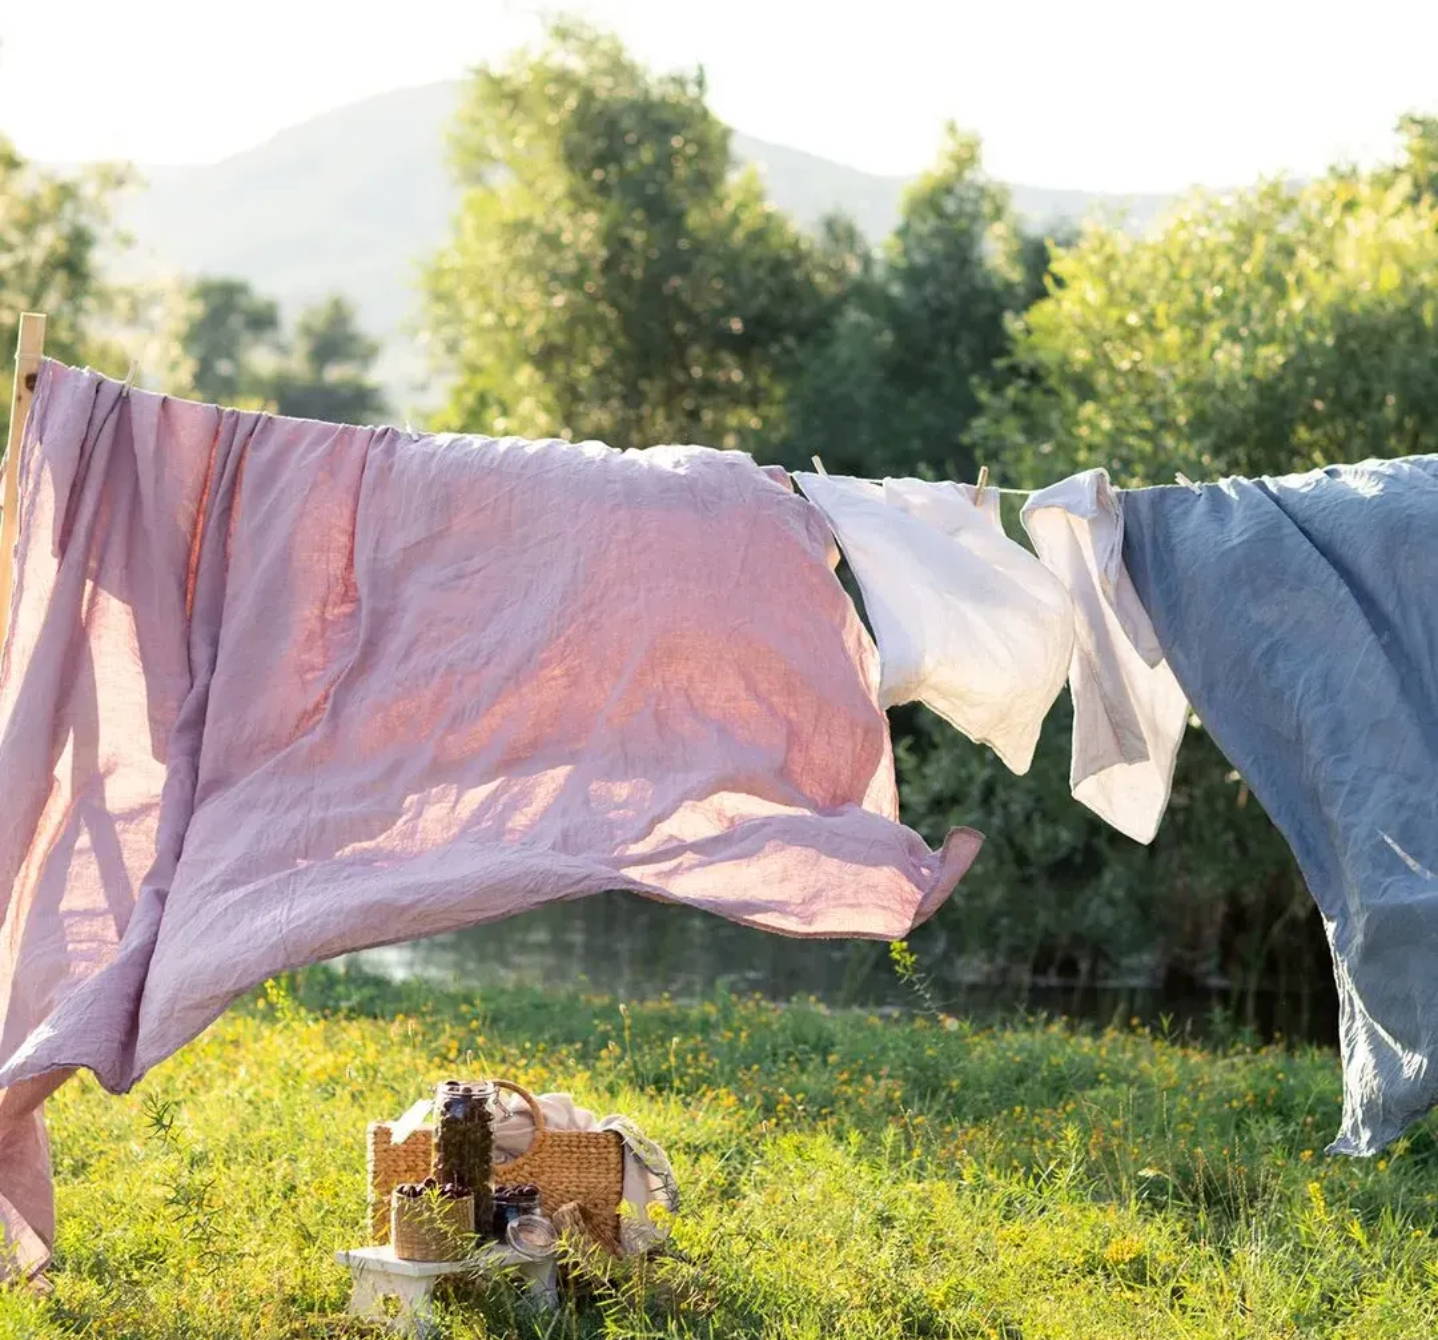 Sheets drying outside – it’s sunny enough to kill dust mites and their eggs. Our dust mite laundry tip is use a washing line